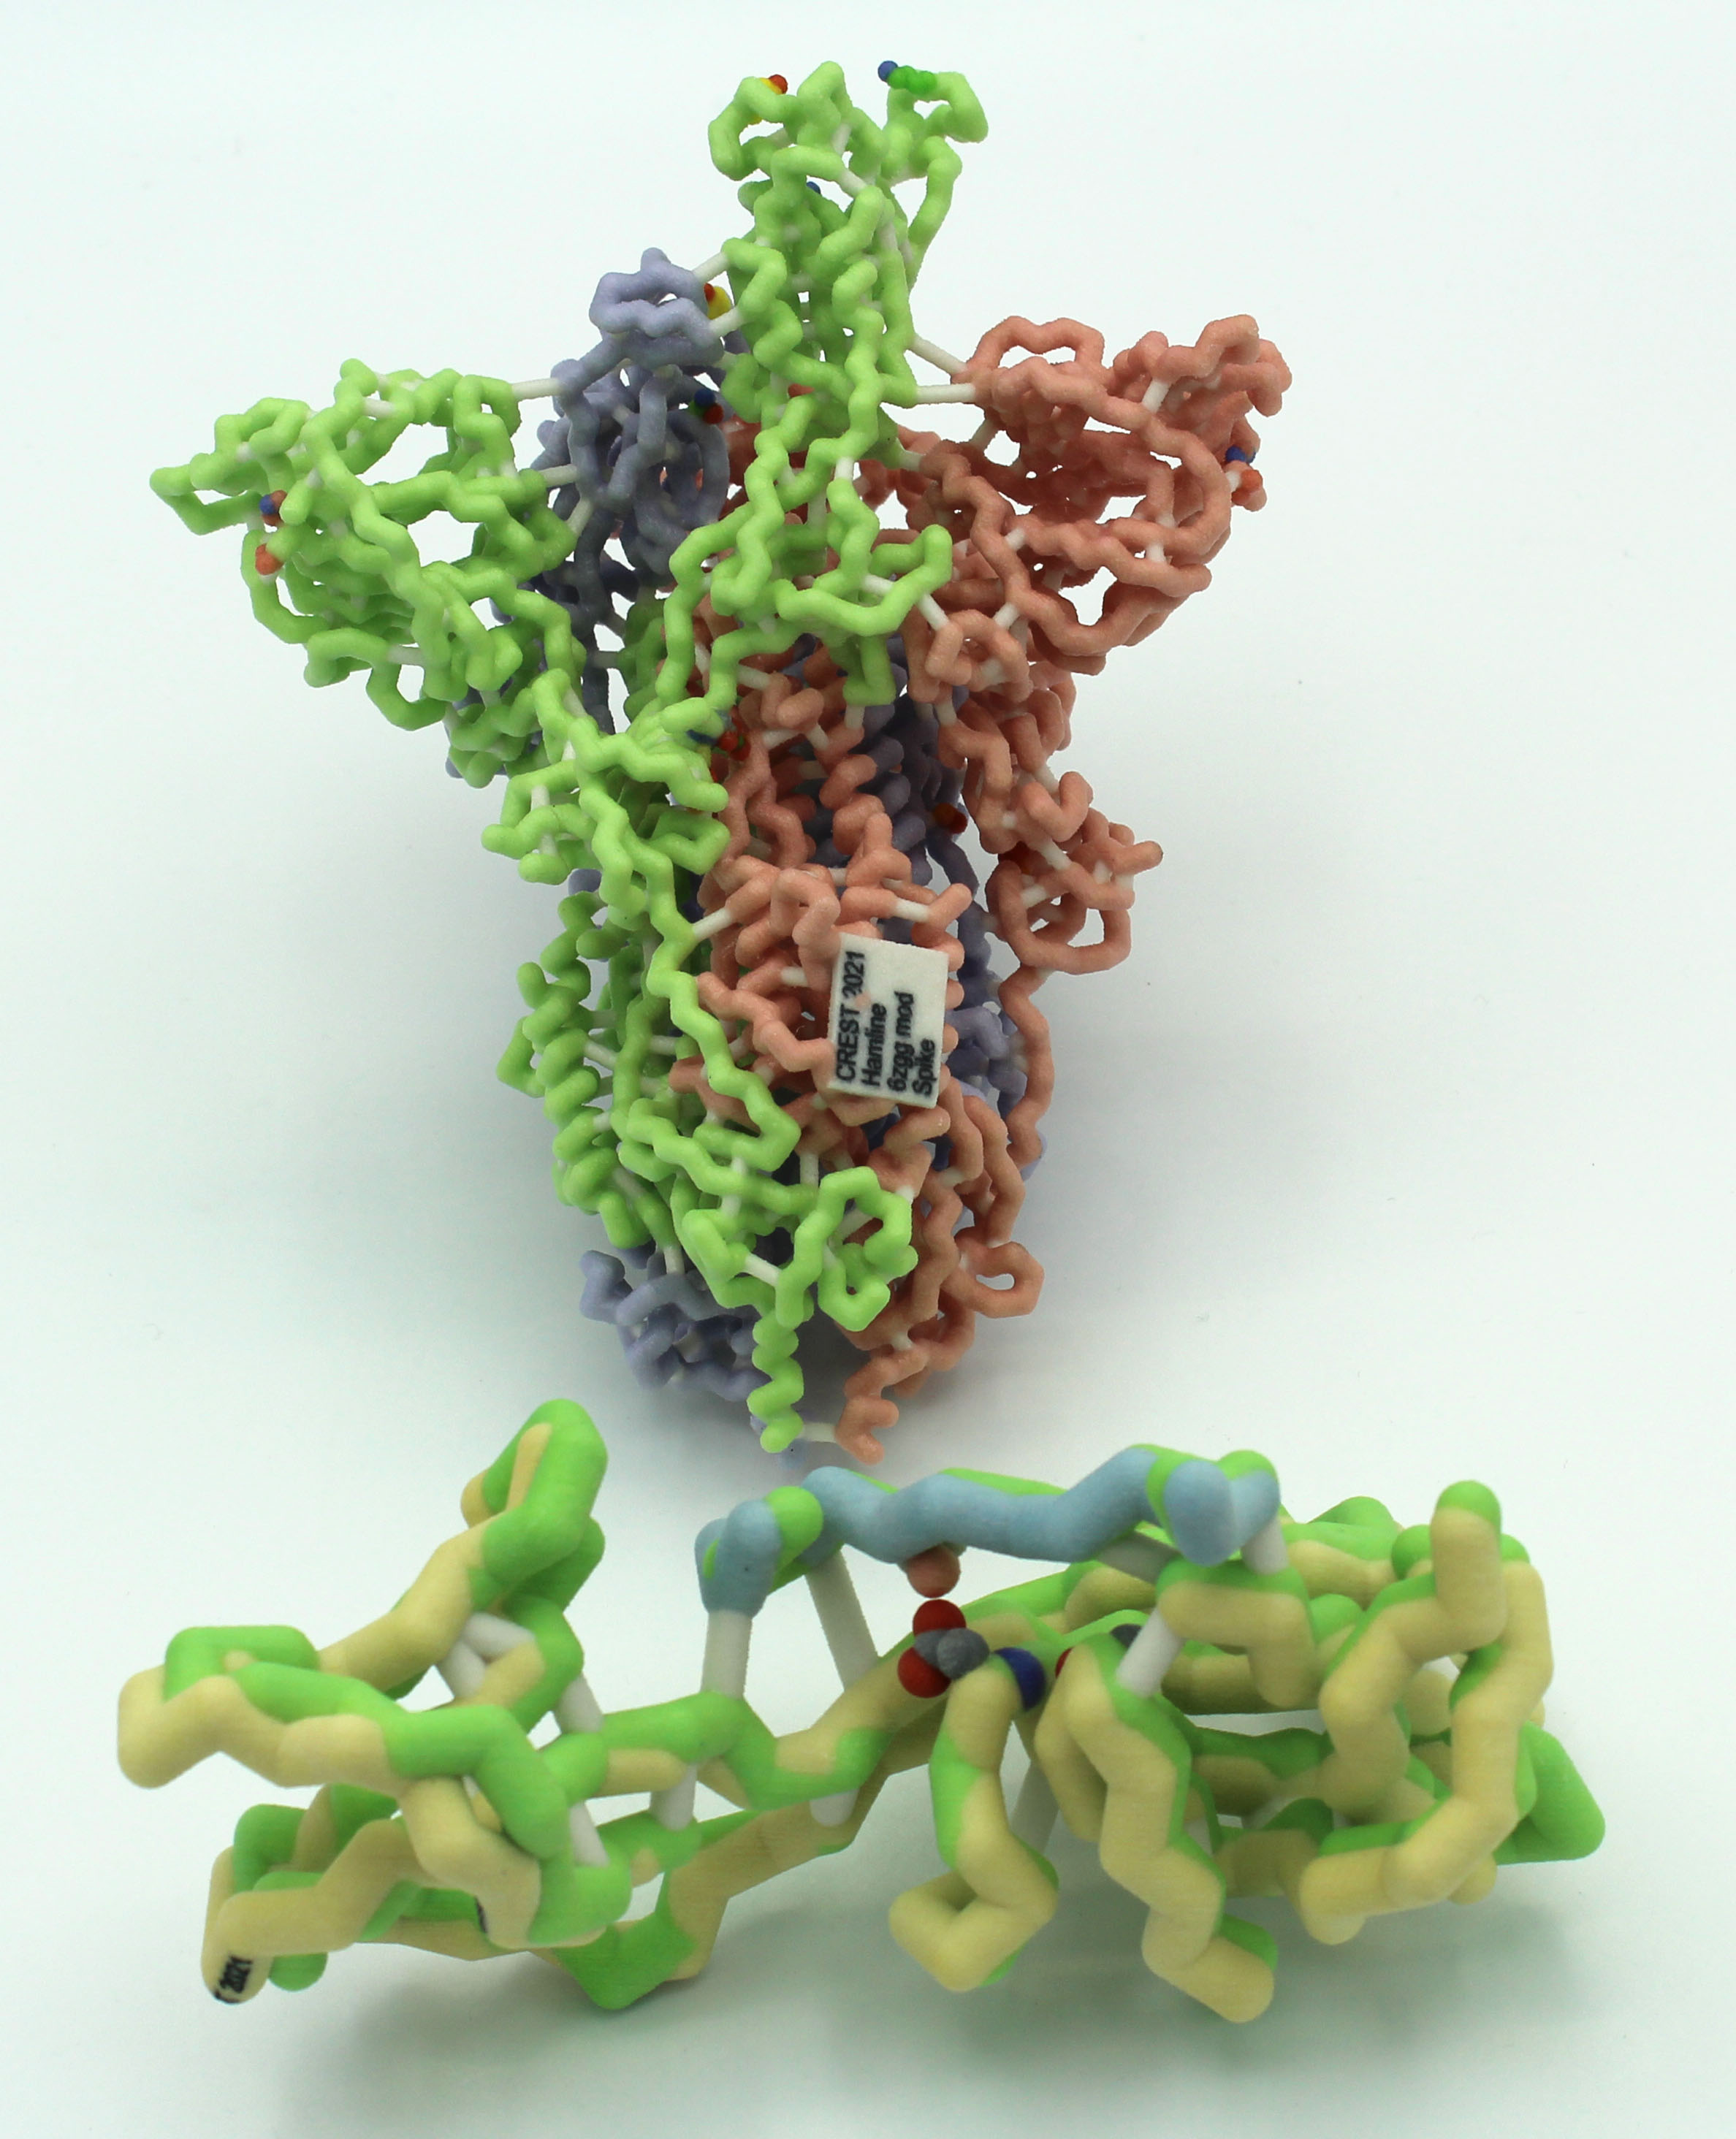 Physical model of SARS-CoV-2 spike protein (top) and overlay model of two forms of variants of teh spike protein (bottom)